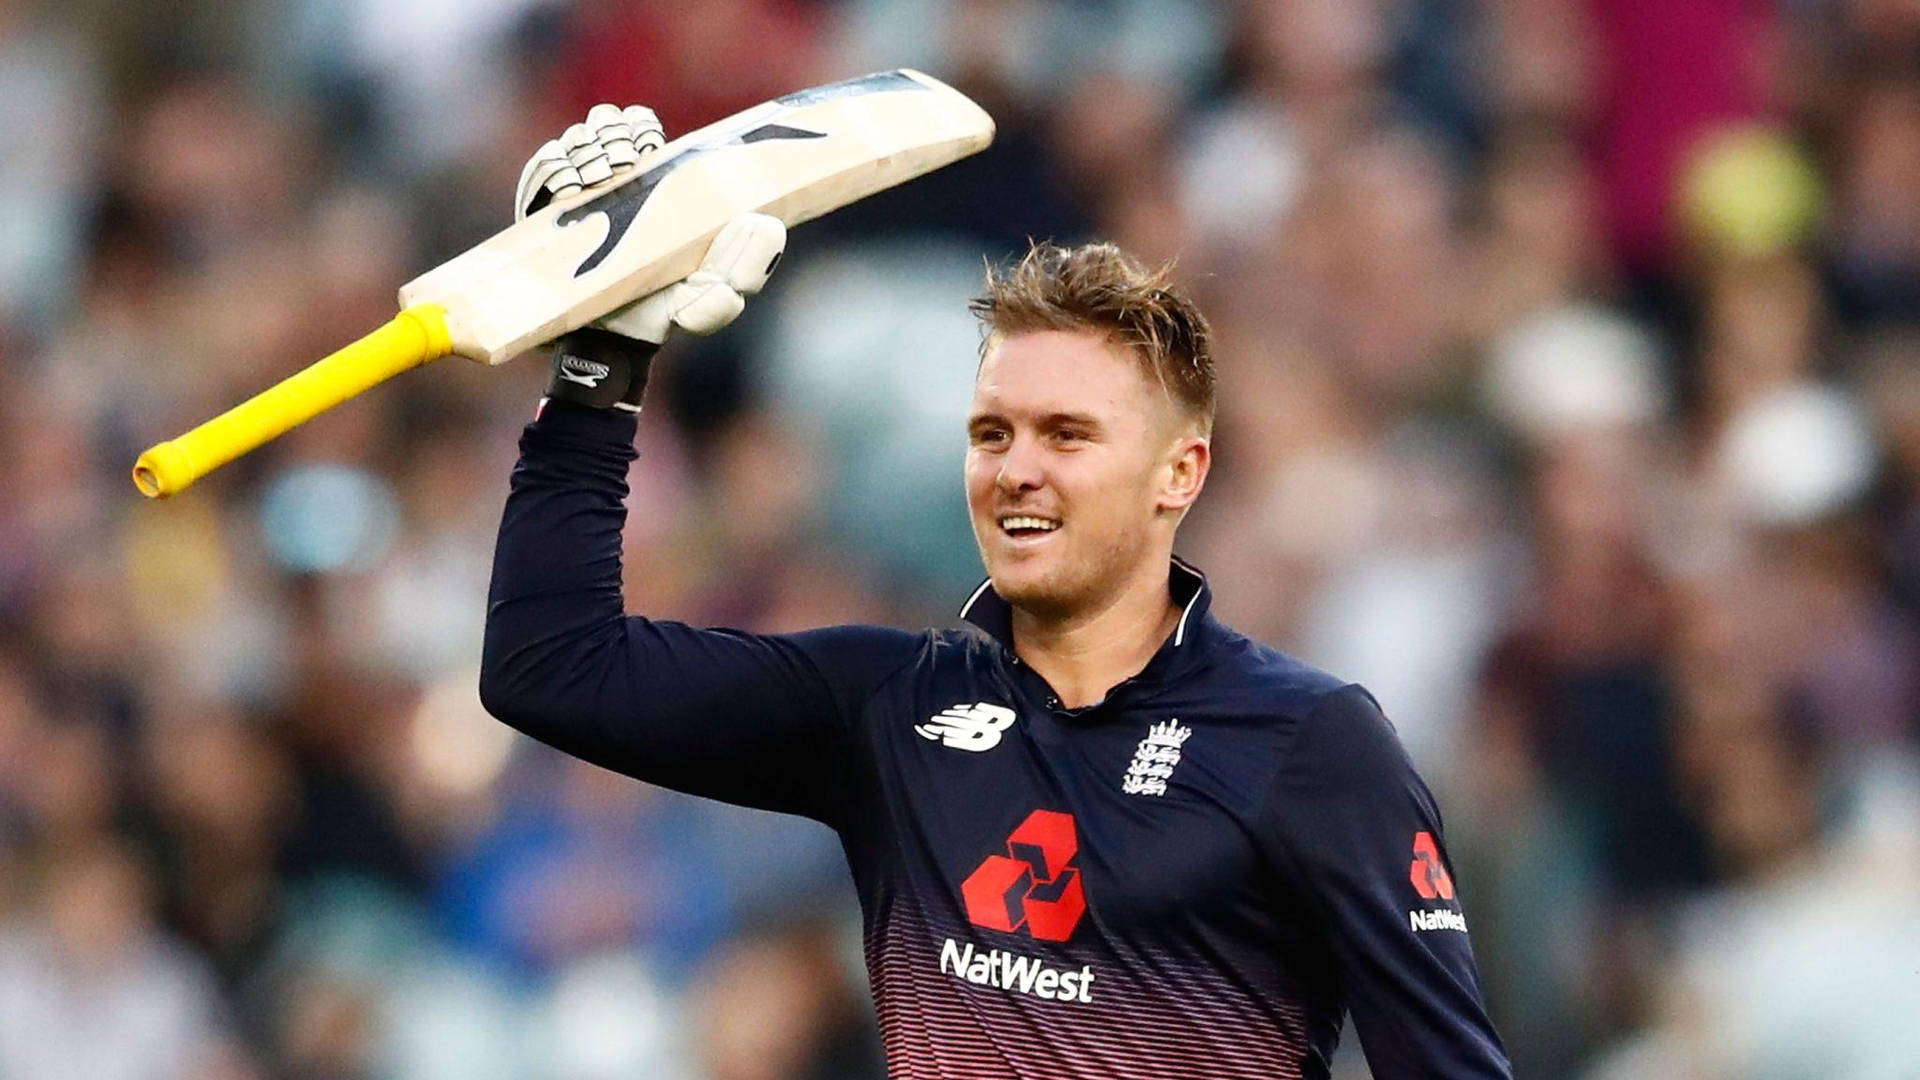 Jason Roy In Action - English Cricketer Background